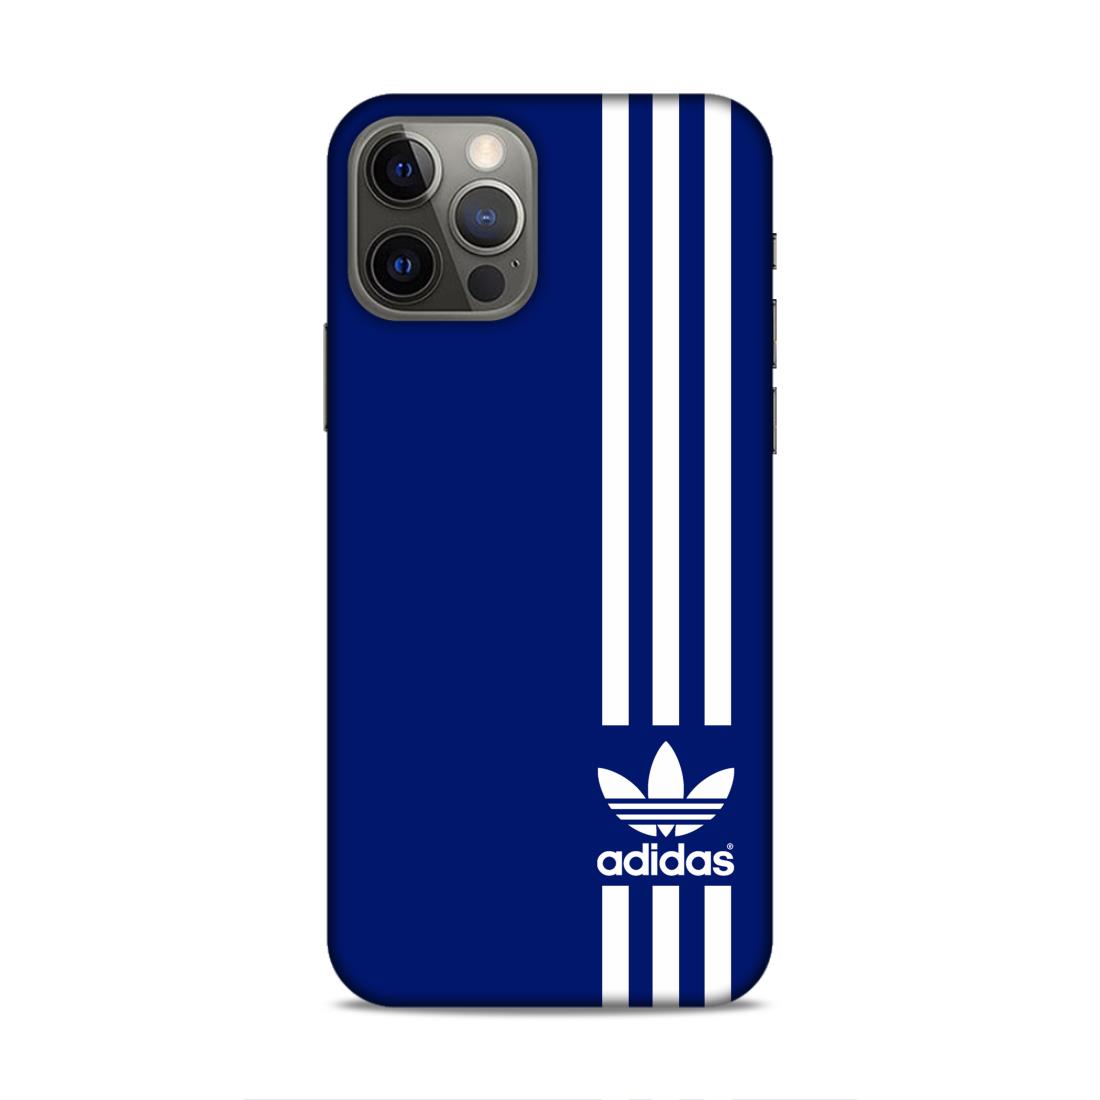 Adidas in Blue Hard Back Case For Apple iPhone 12 / 12 Pro